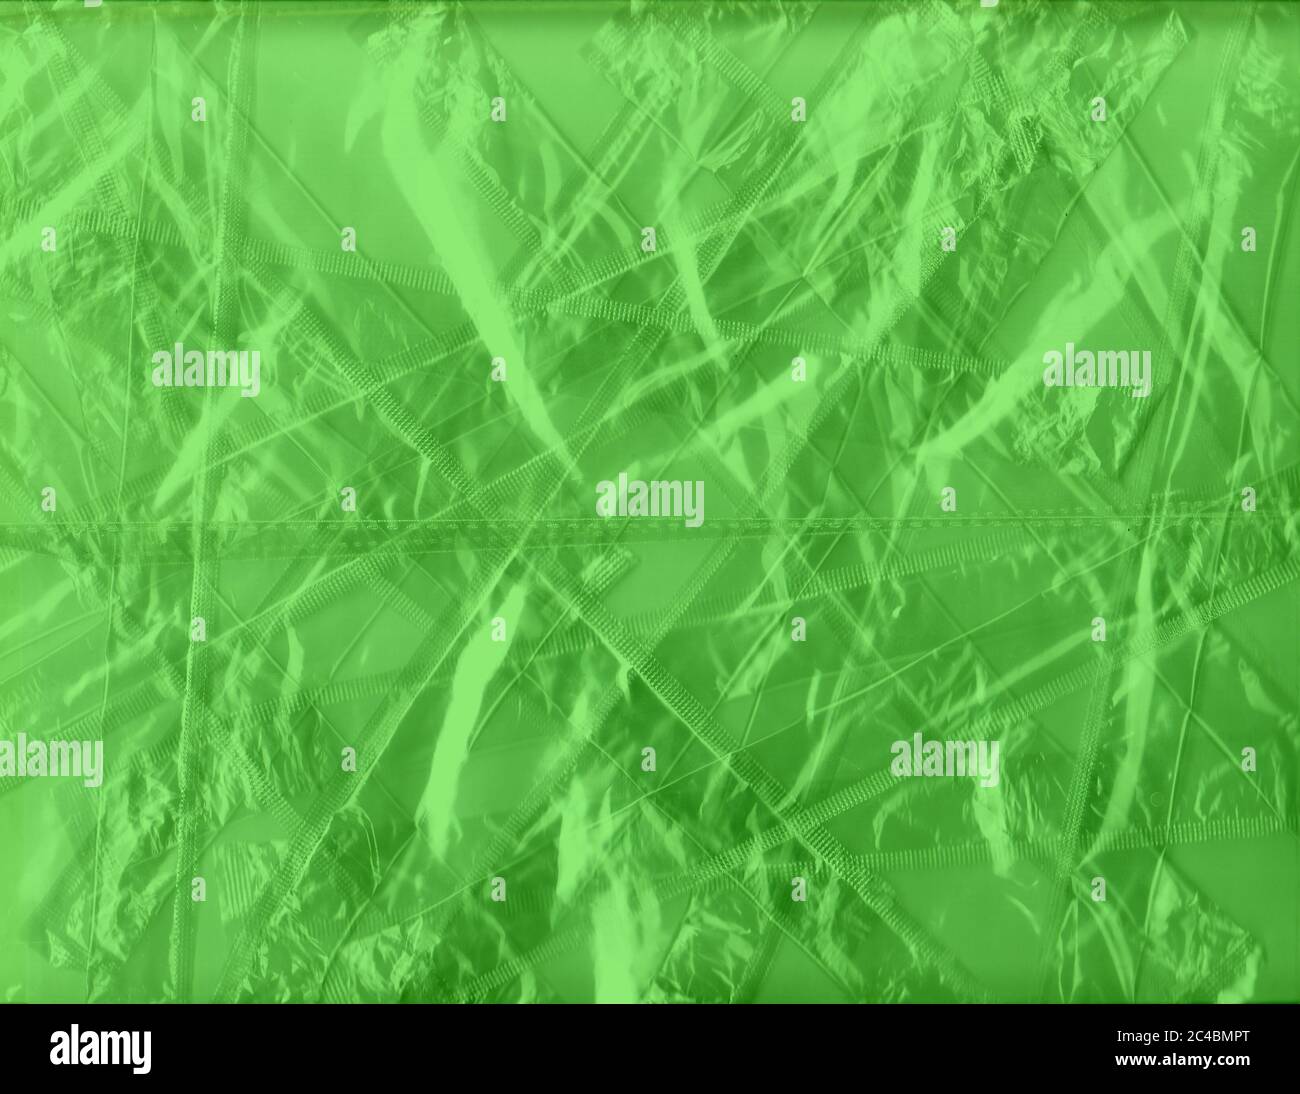 Fresh green abstract textured wallpaper graphic with space for your text, concept for spring season, springtime, new life, beginnings Stock Photo